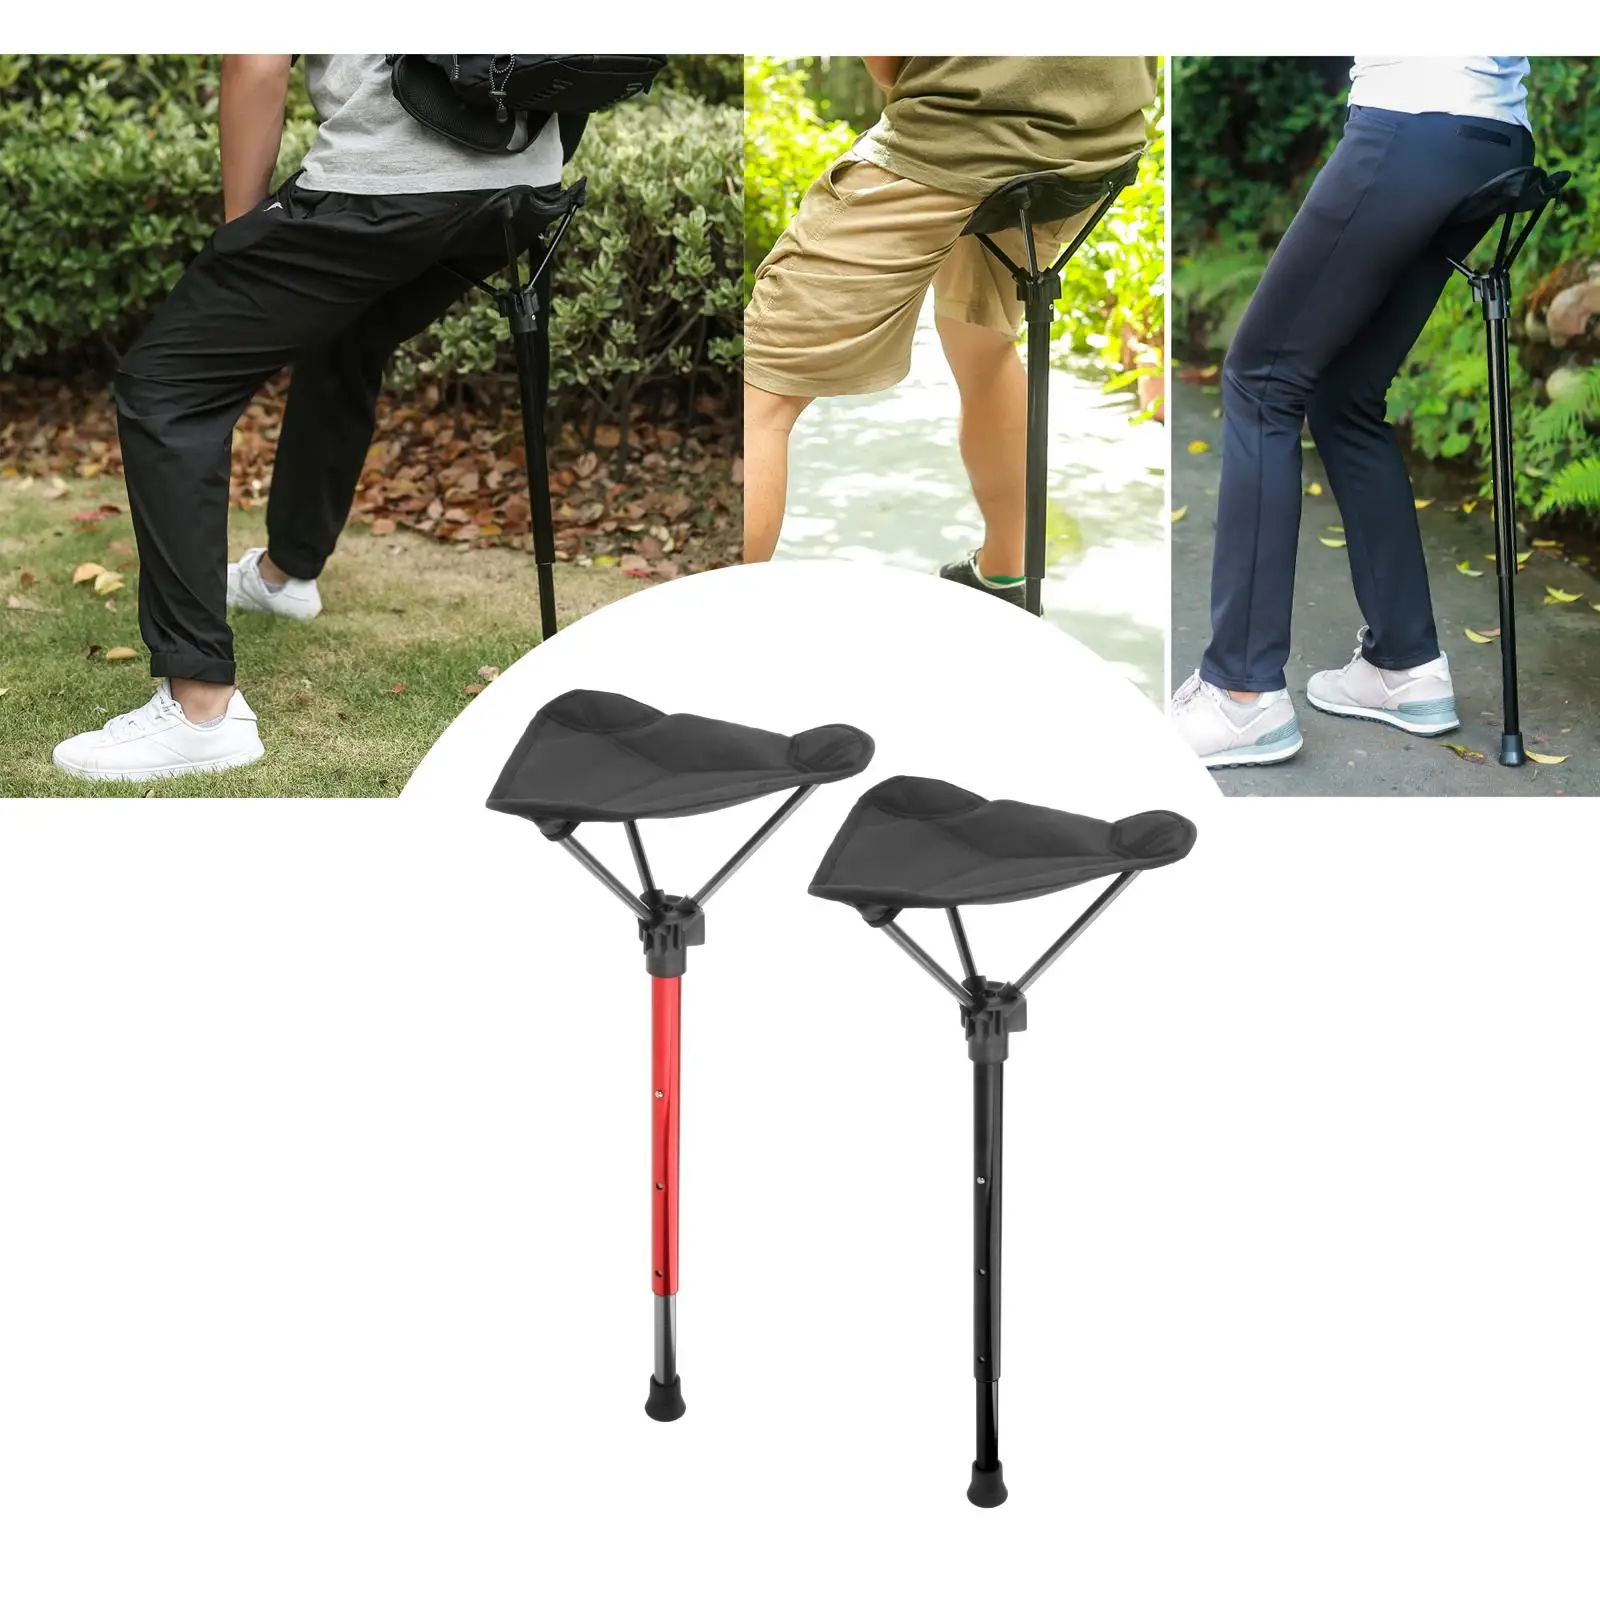 Foldable Camping Stool, Retractable Hiking Chair, Single Leg Adjustable Seat for Camping, Outdoor Barbecue, Fishing and Concert